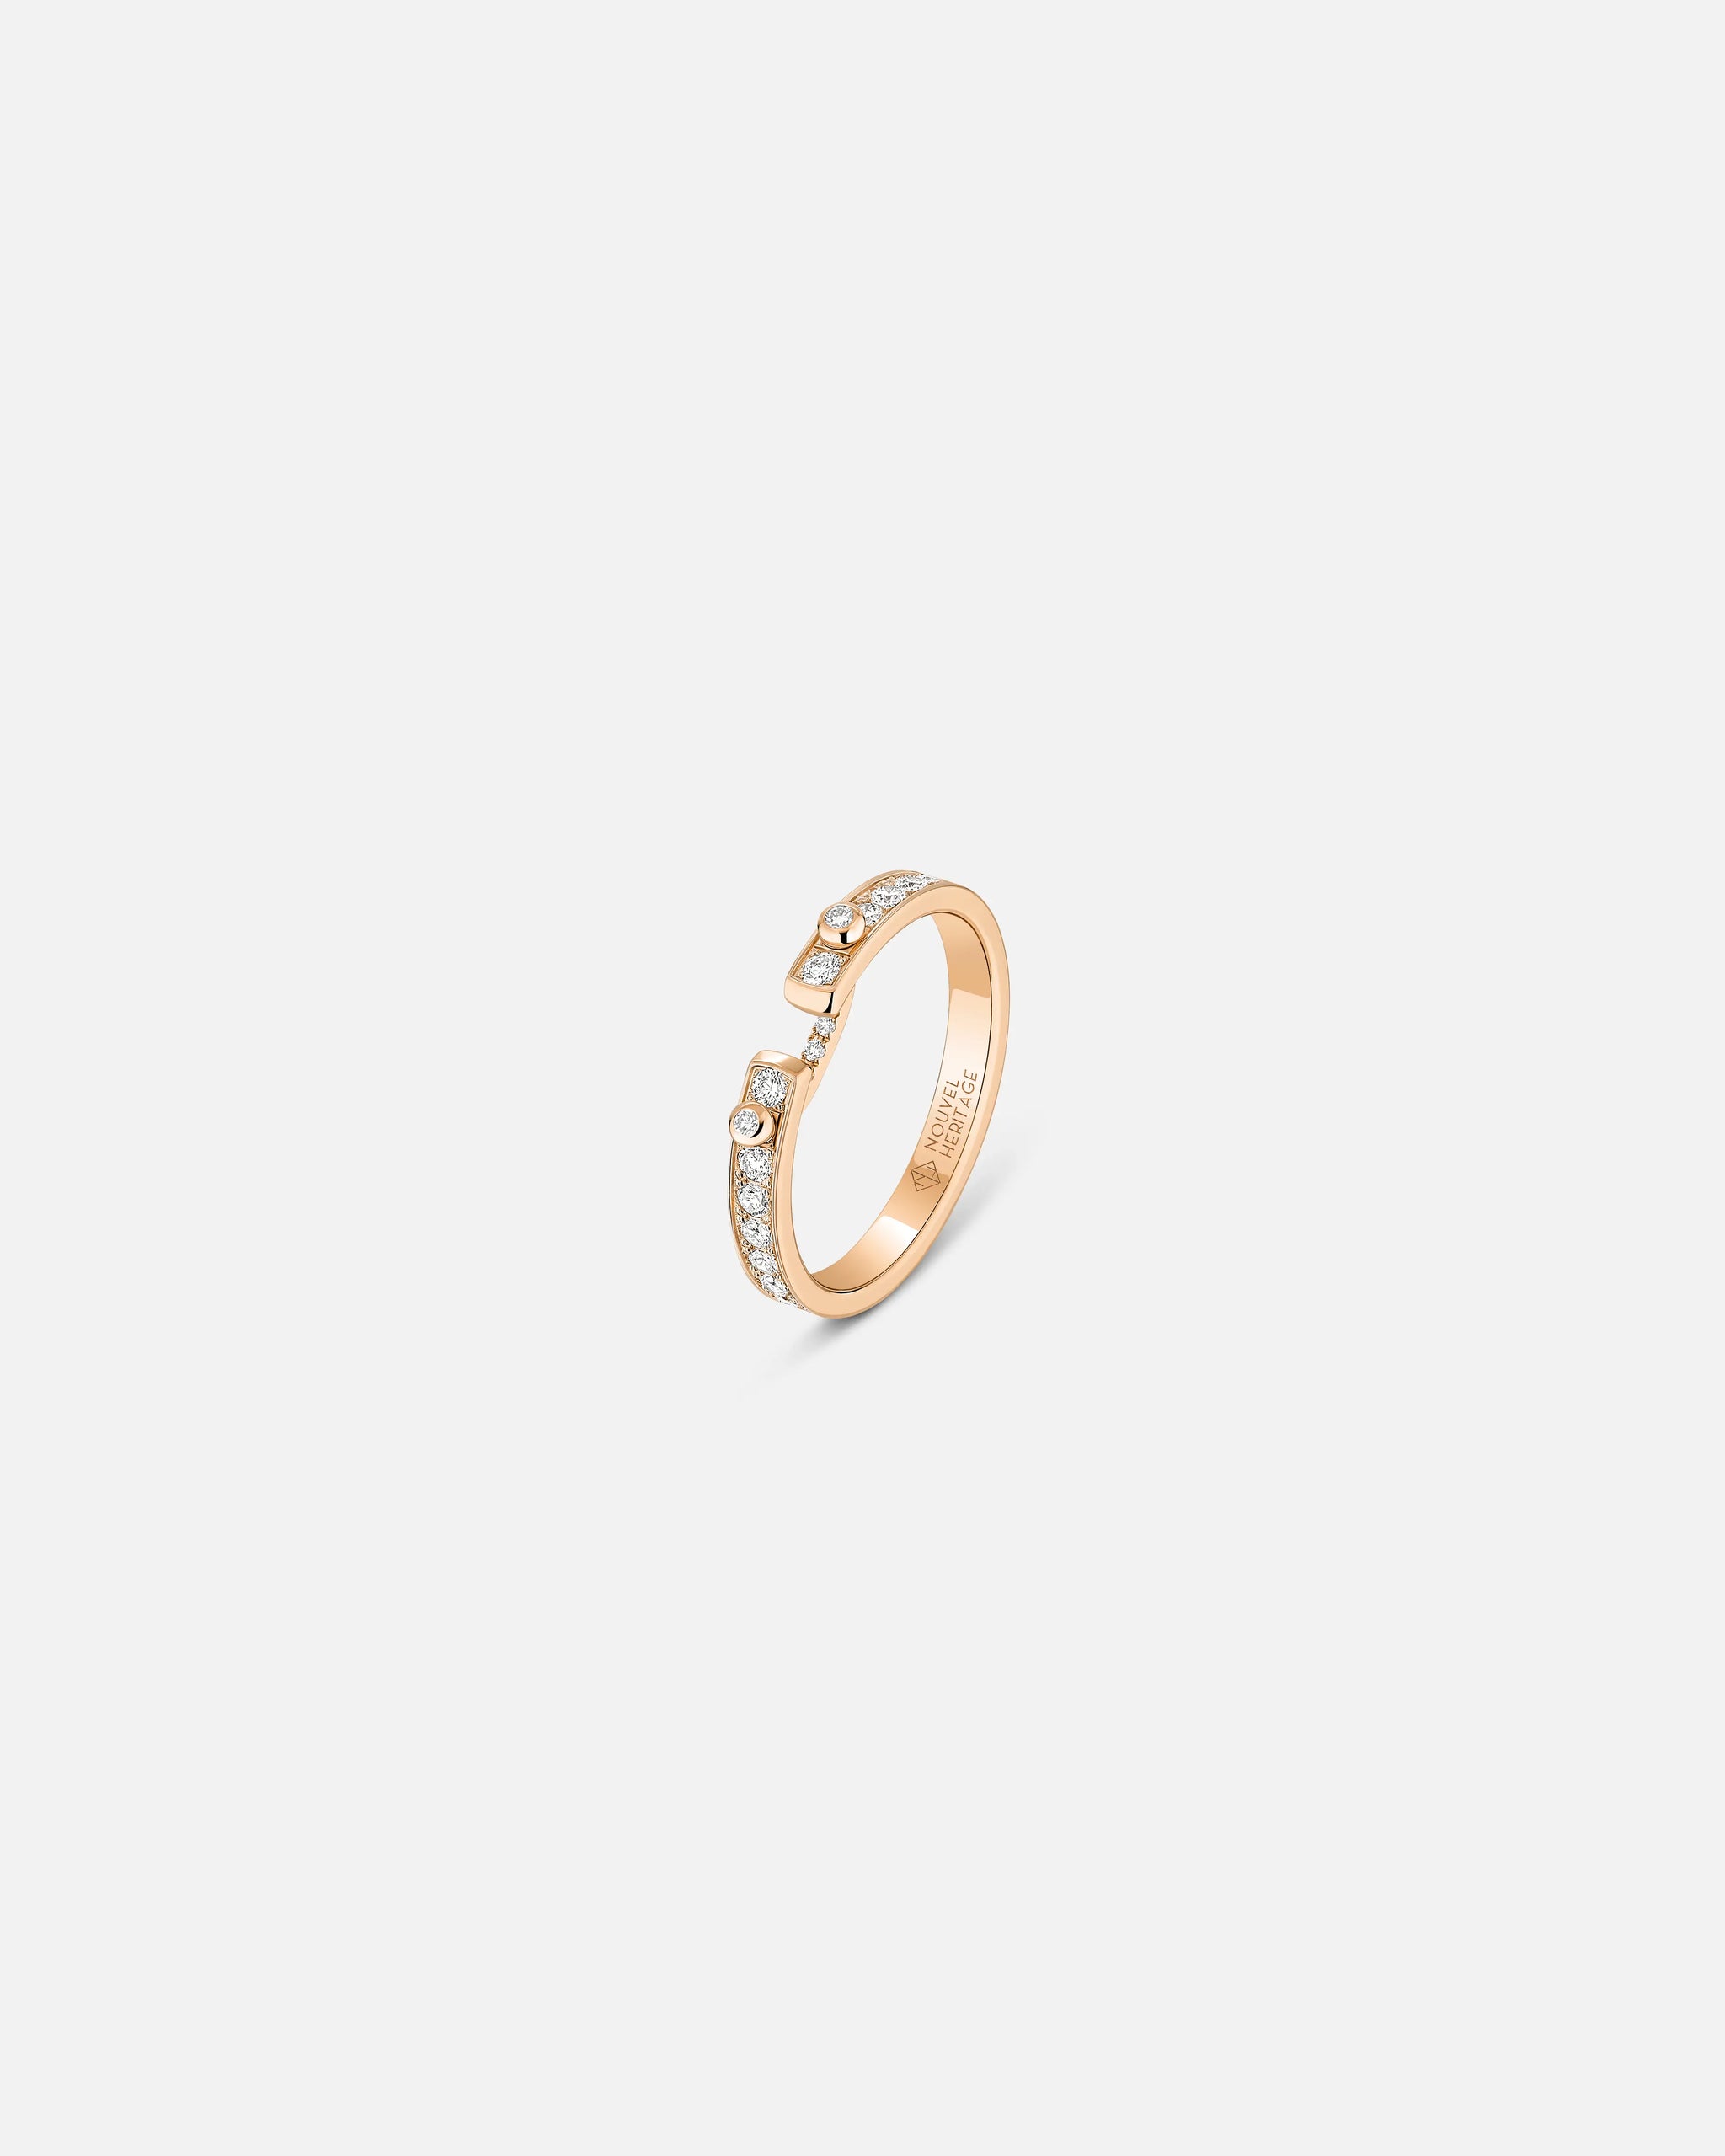 Eternity Tuxedo PM Mood Ring in Rose Gold - 1 - Nouvel Heritage